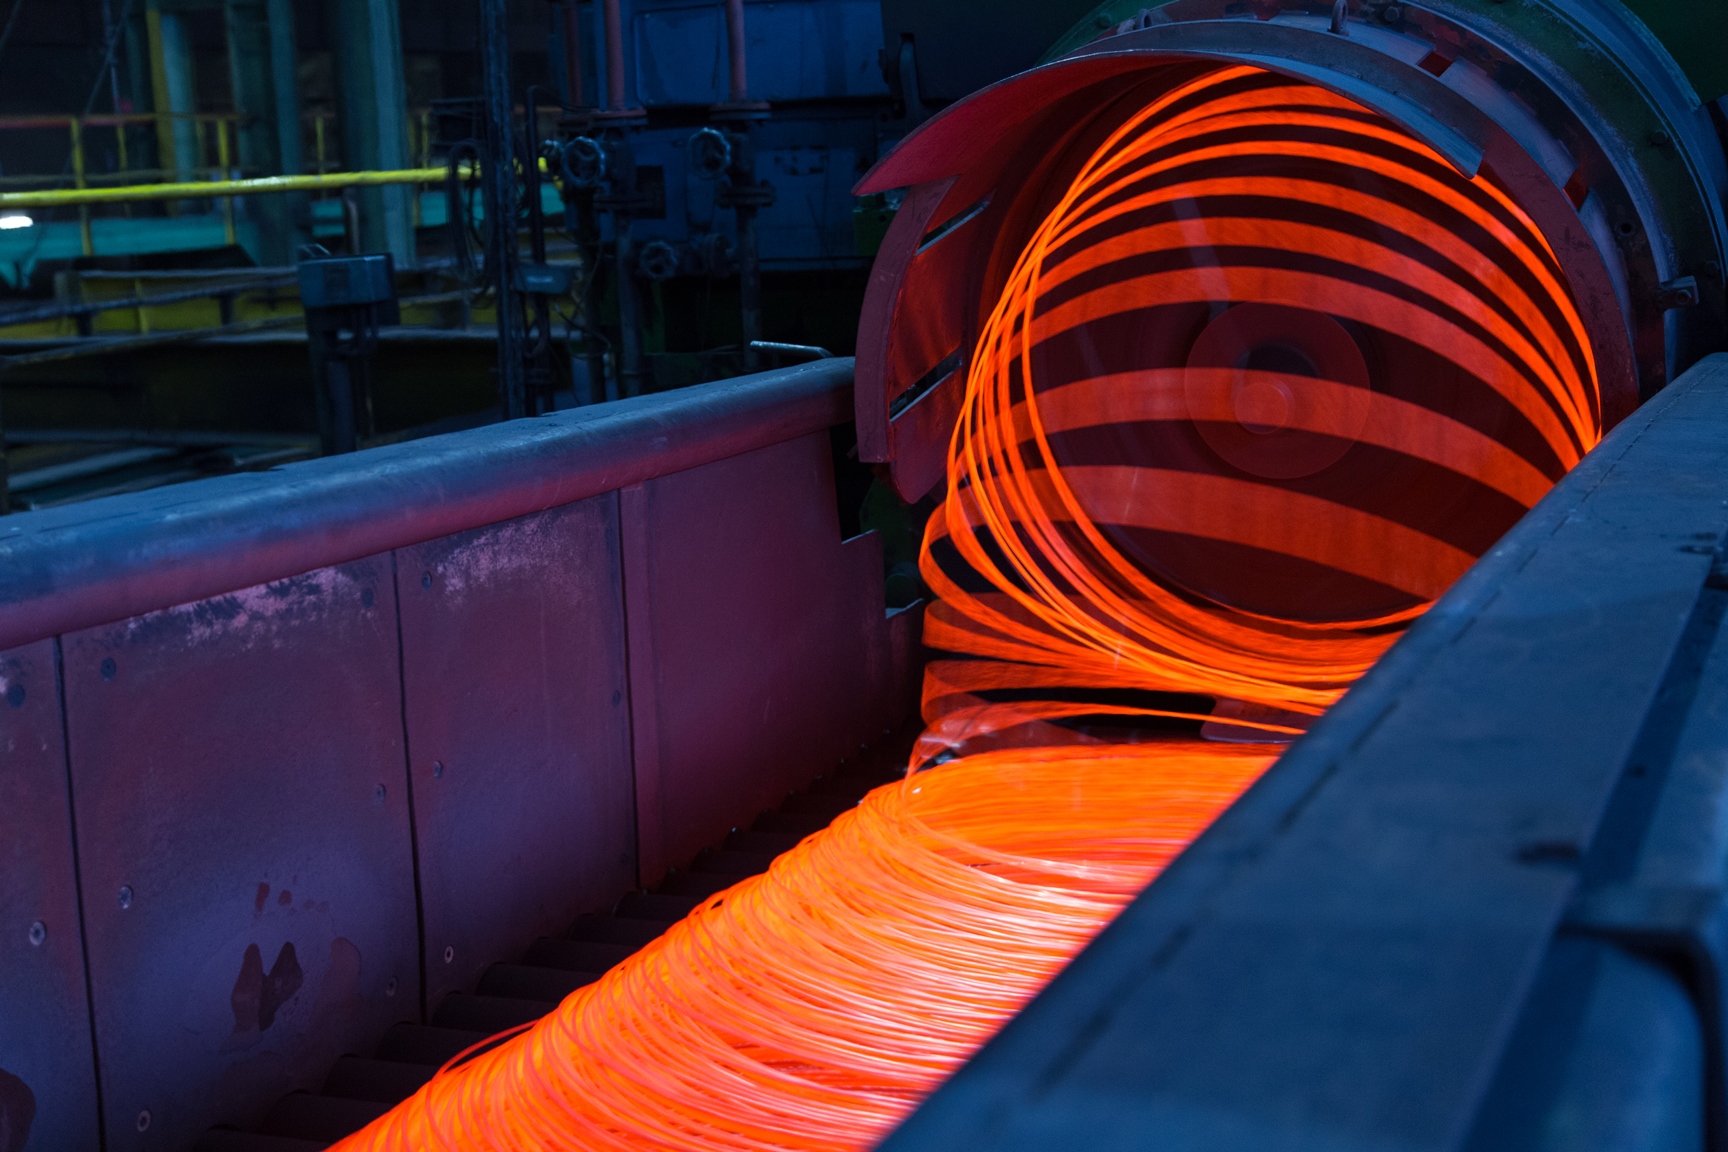 Wempco starts producing wire rod